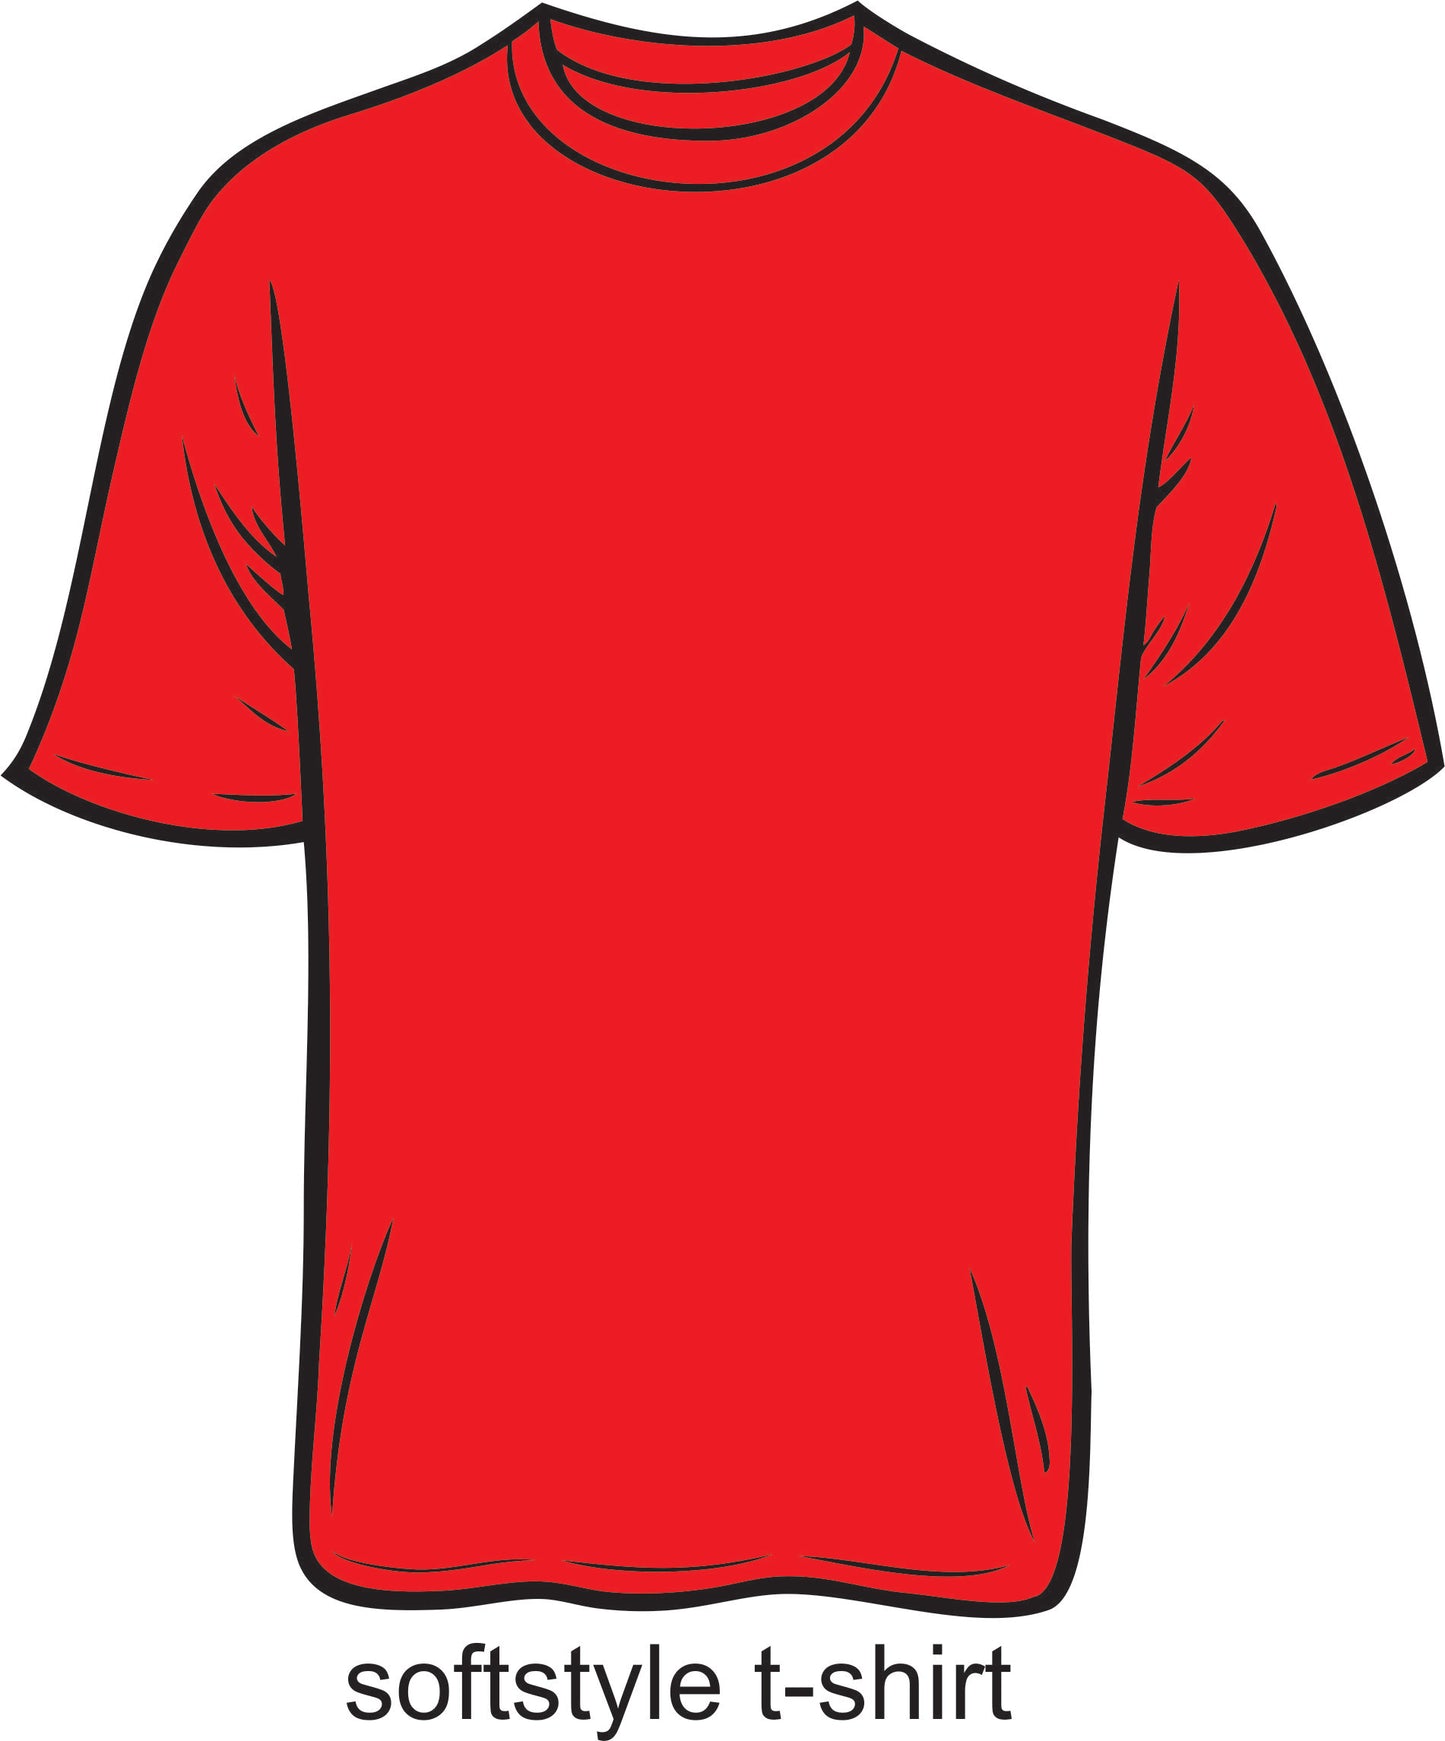 RED SOFT STYLE T-SHIRT